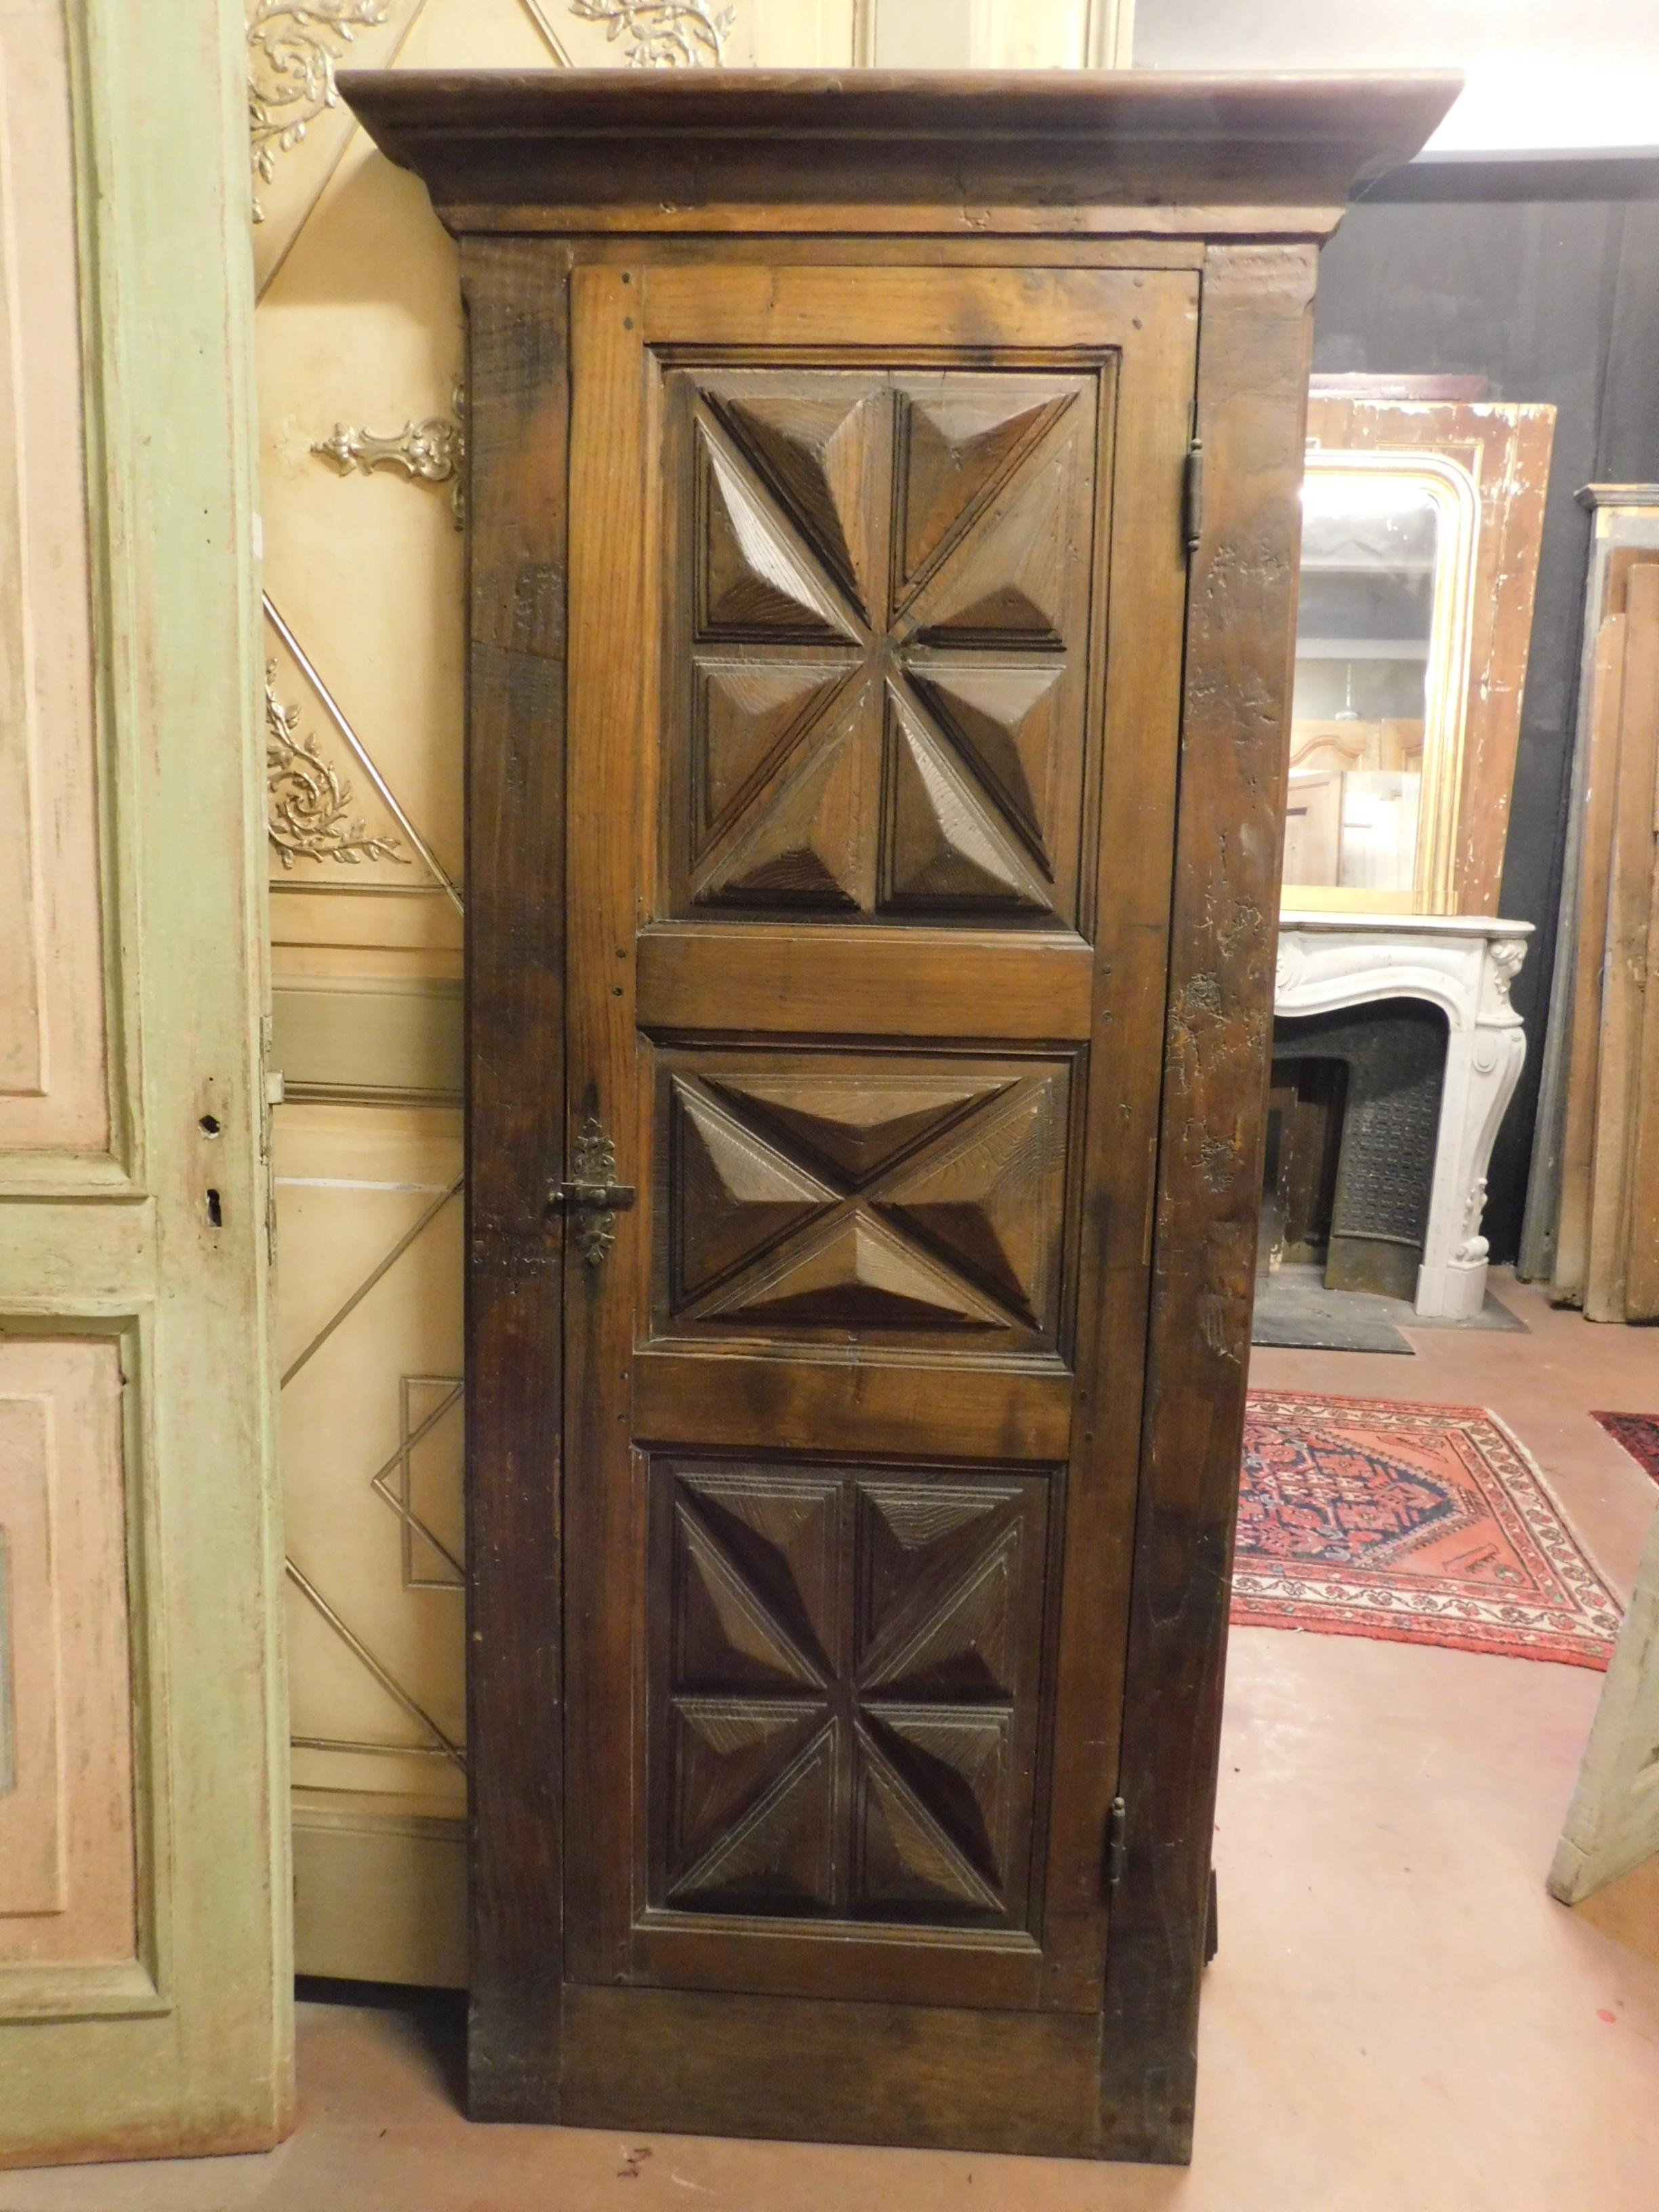 Antique placard, built-in wardrobe with hand carved diamond door, cupboard walnut luxury, hand carved by an artist in the 18th century, coming from a historic building in Italy, suitable for luxurious and prestigious kitchens or living